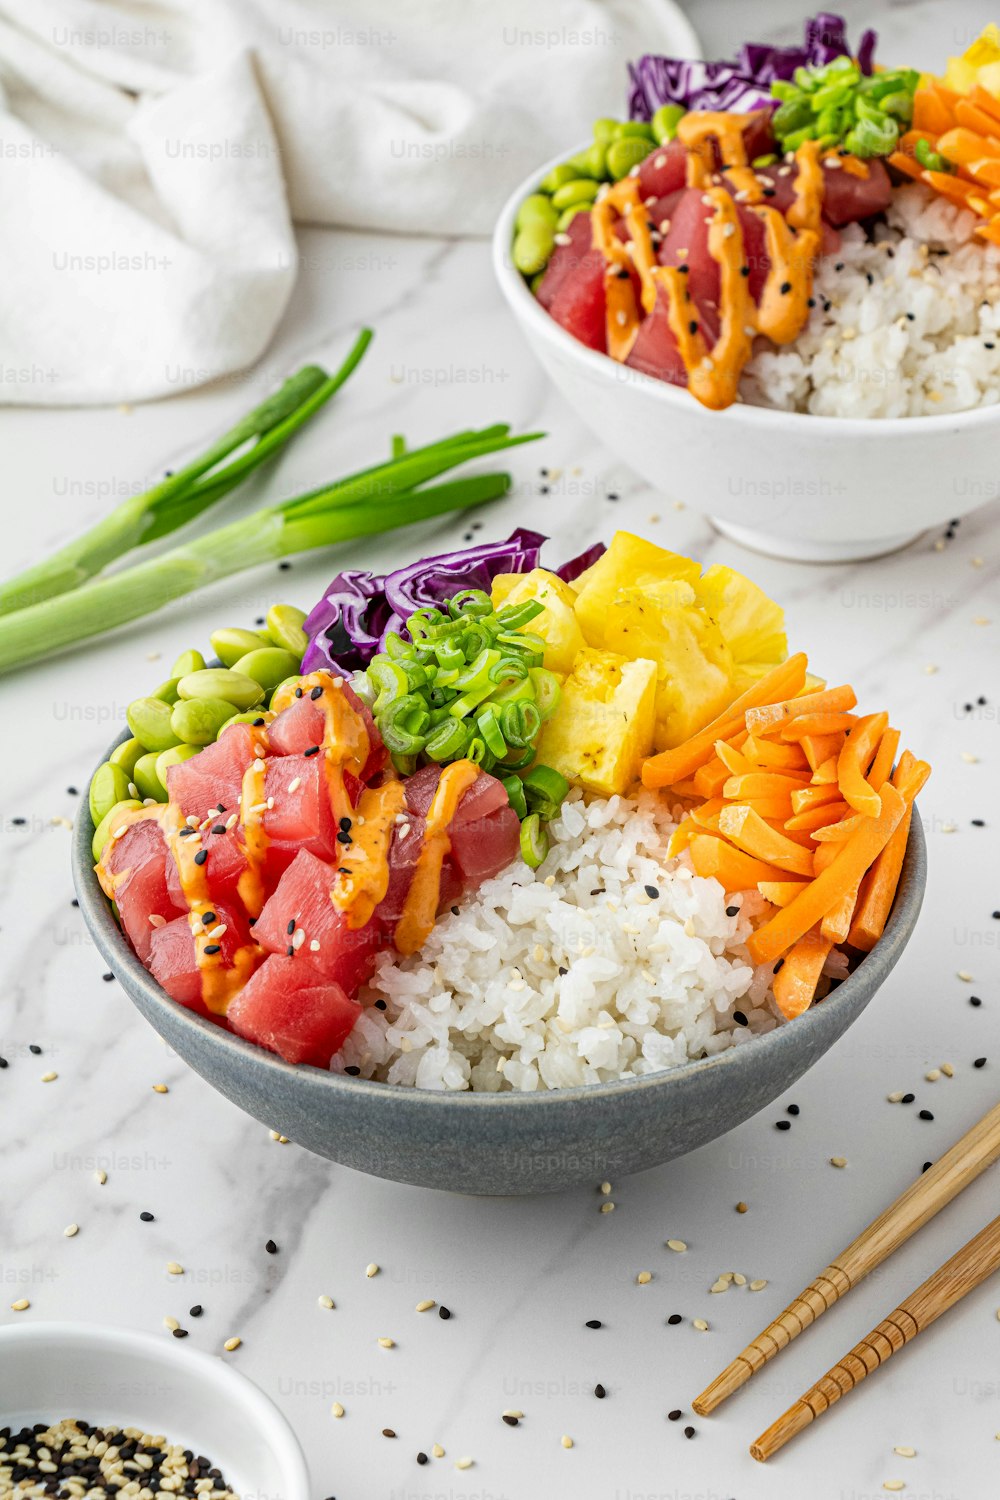 a bowl filled with rice, vegetables, and meat